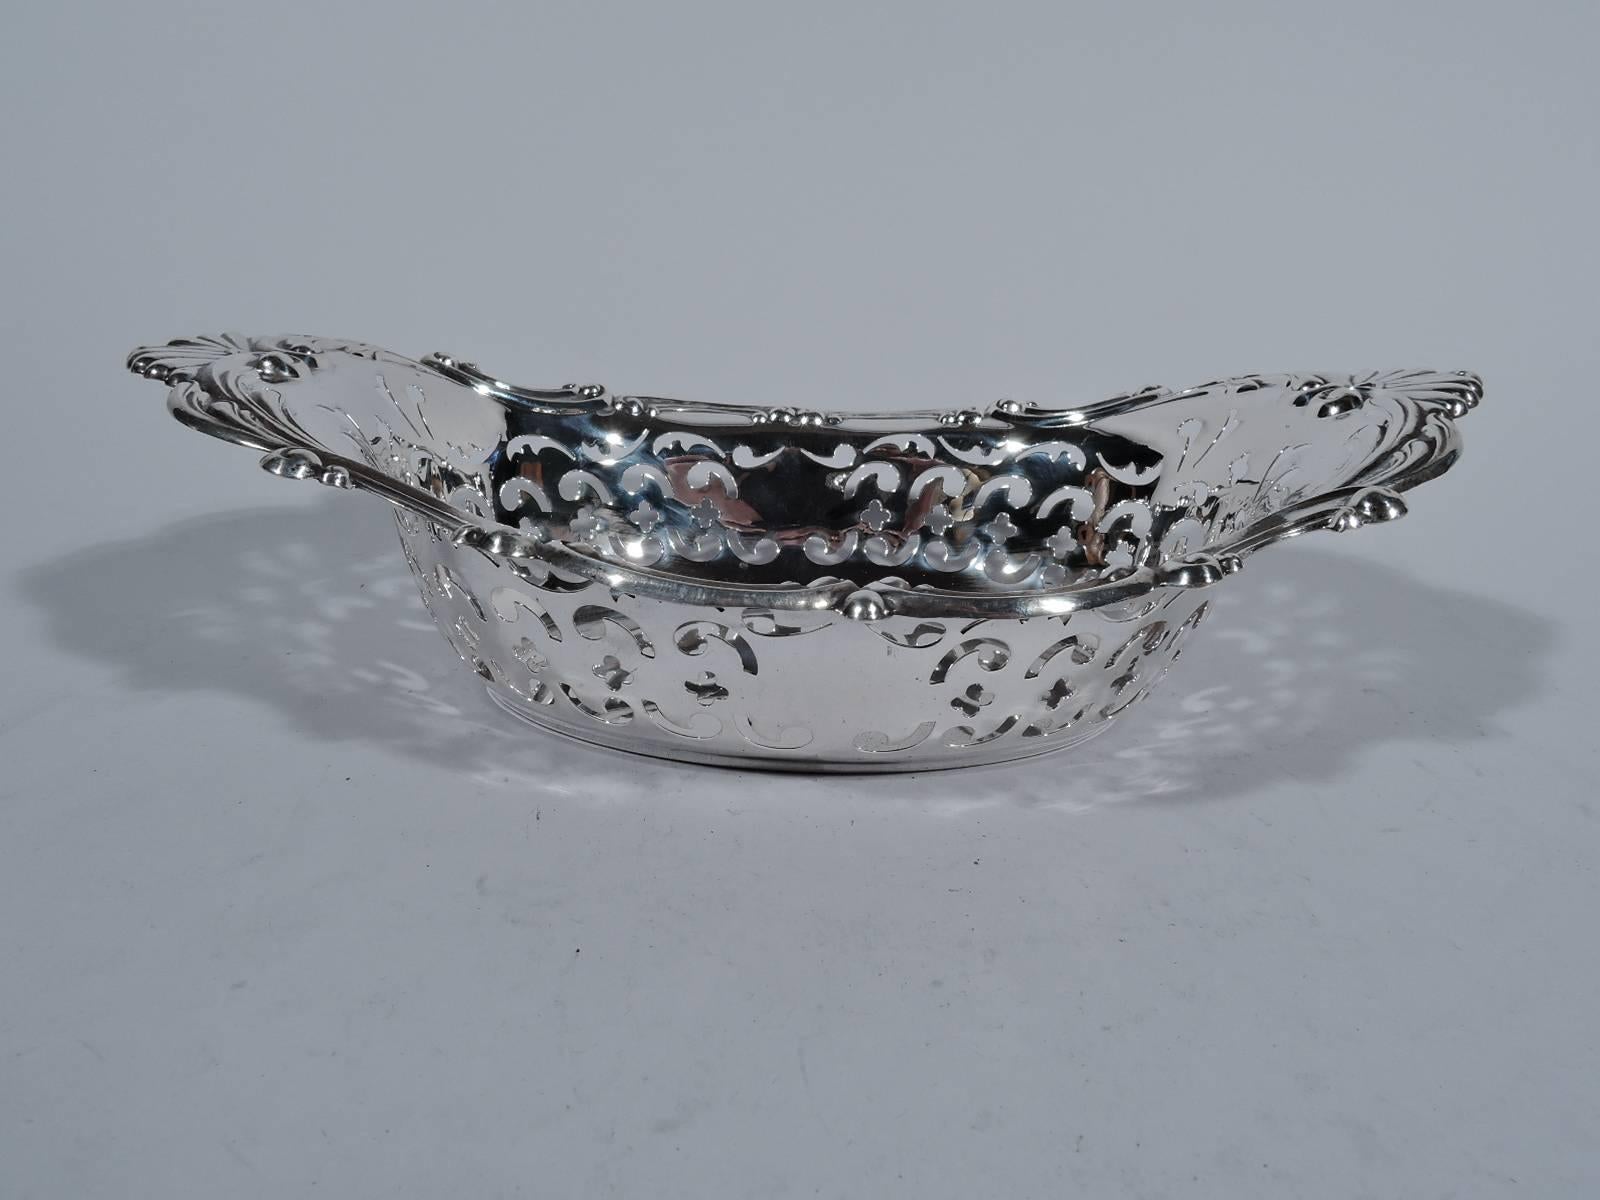 Classical sterling silver bowl. Made by Gorham in Providence in 1952. Well is solid and oval and sides have pierced scrolls and quatrefoils. Rim has C-scrolls and scallop shells at ends. A pretty piece in the traditional style. Hallmark includes